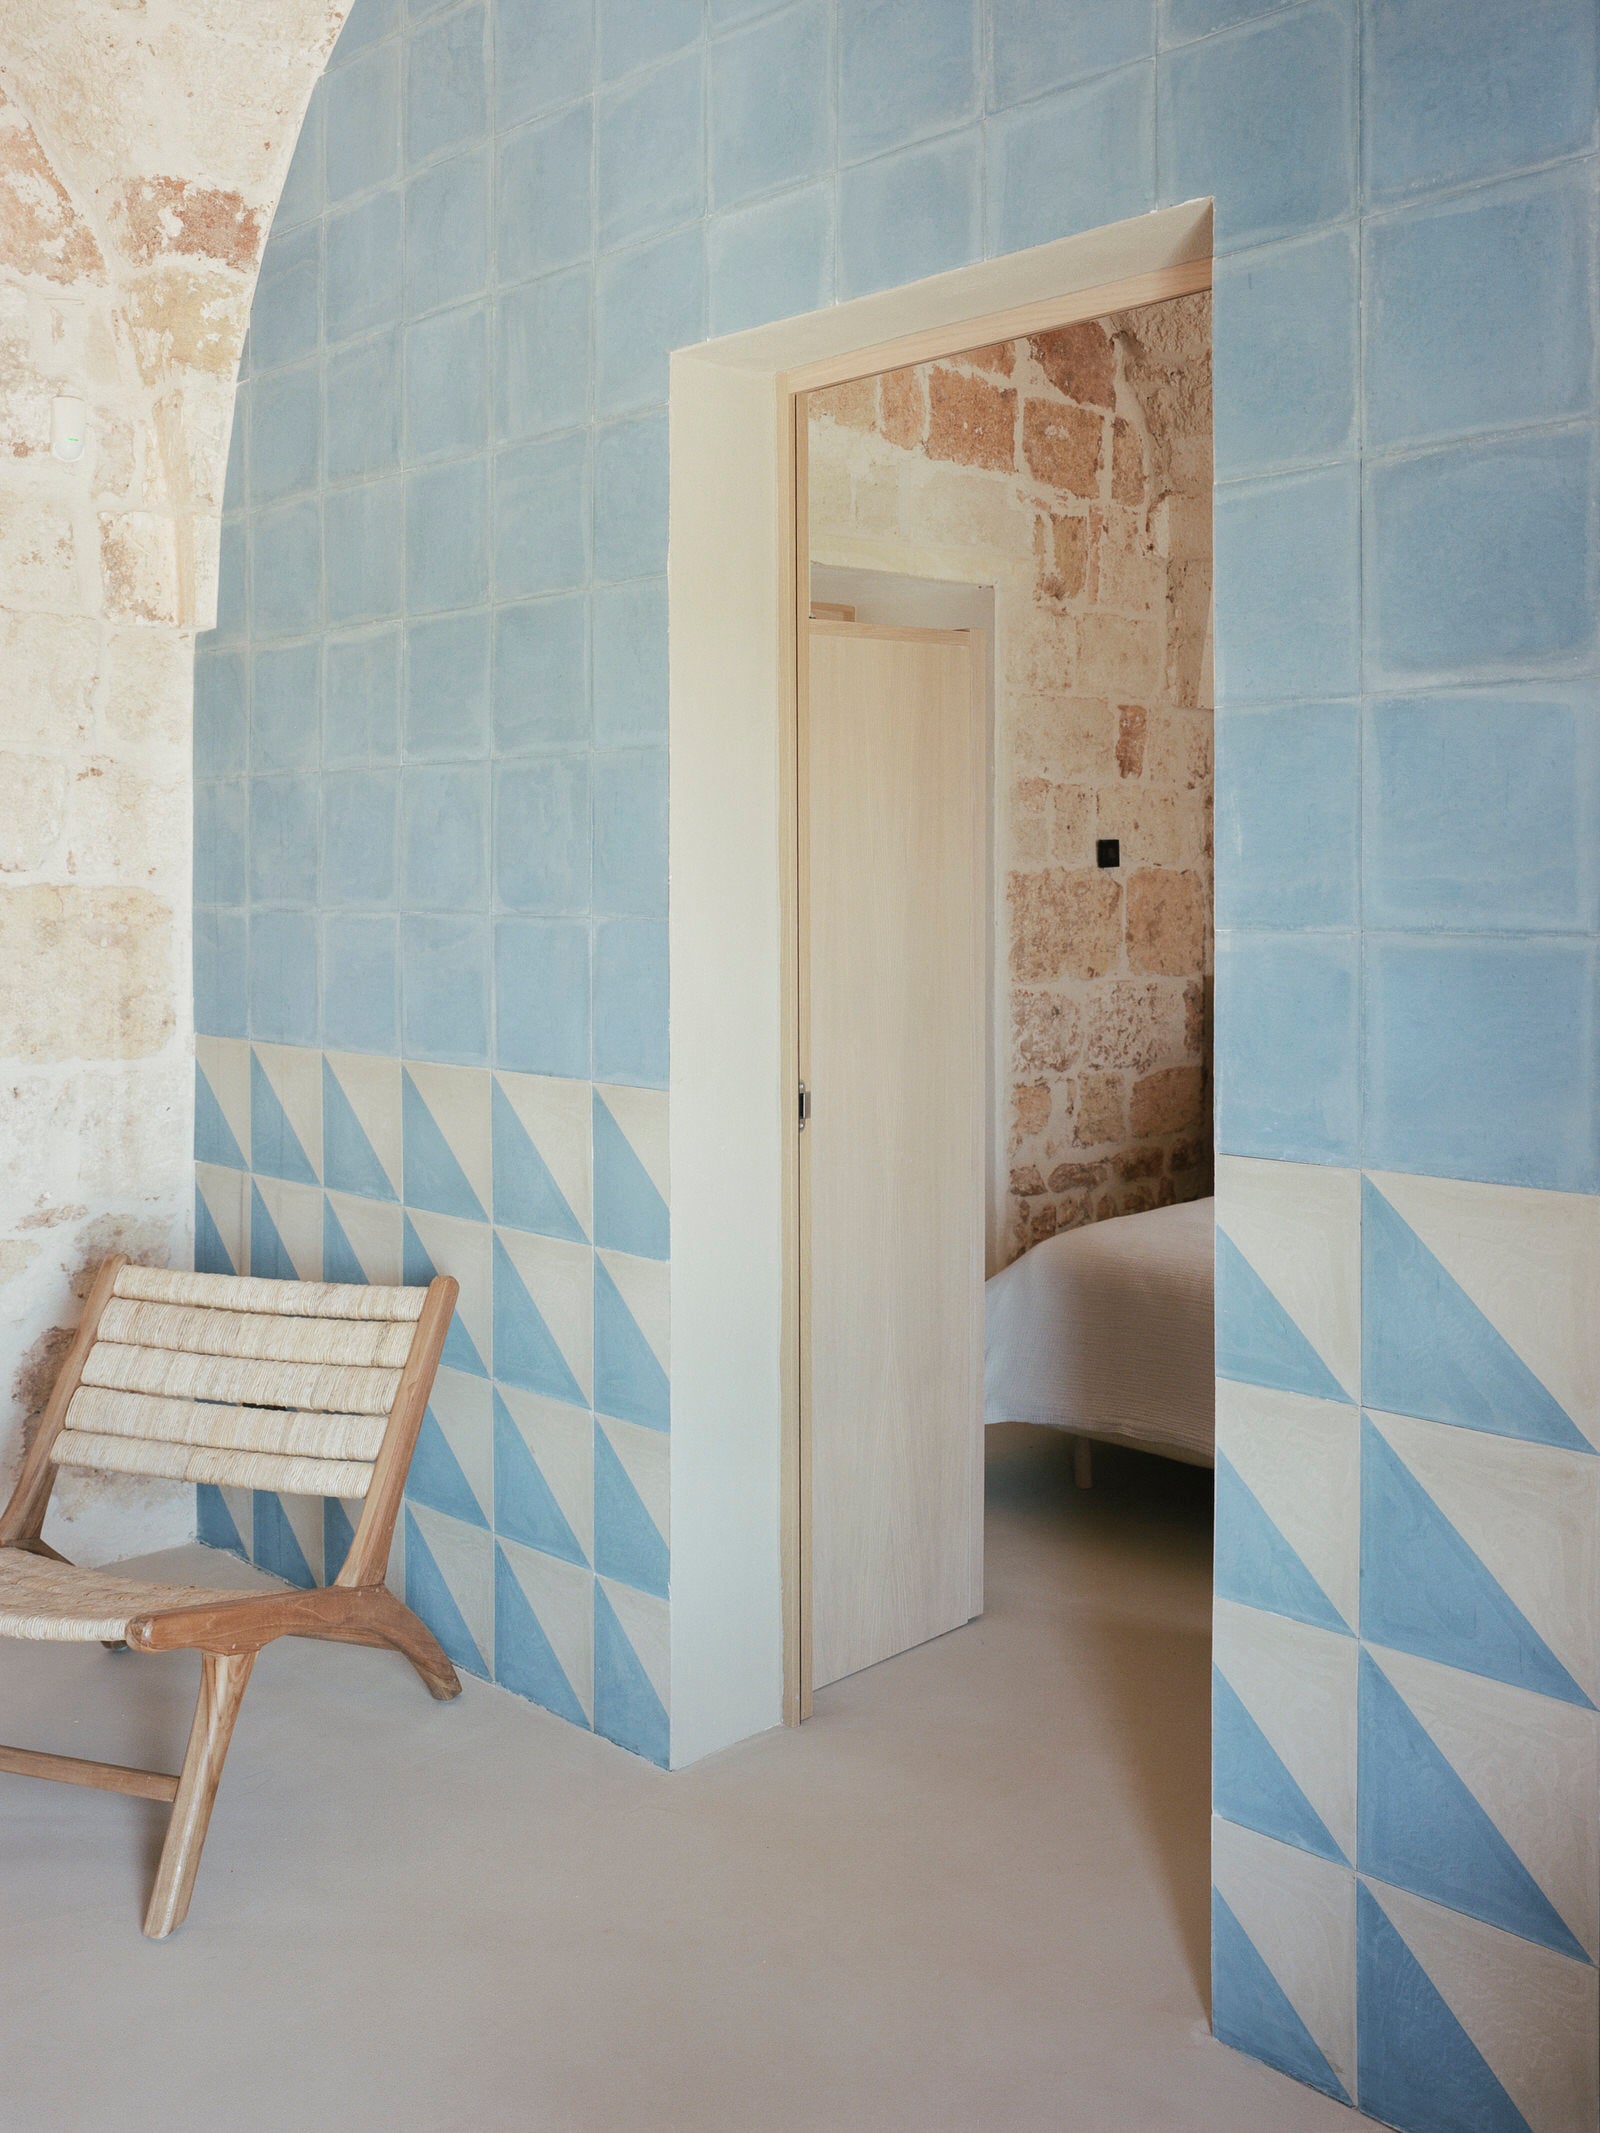 Faded light blue tile on an arched wall contrasting beige walls in Italy.